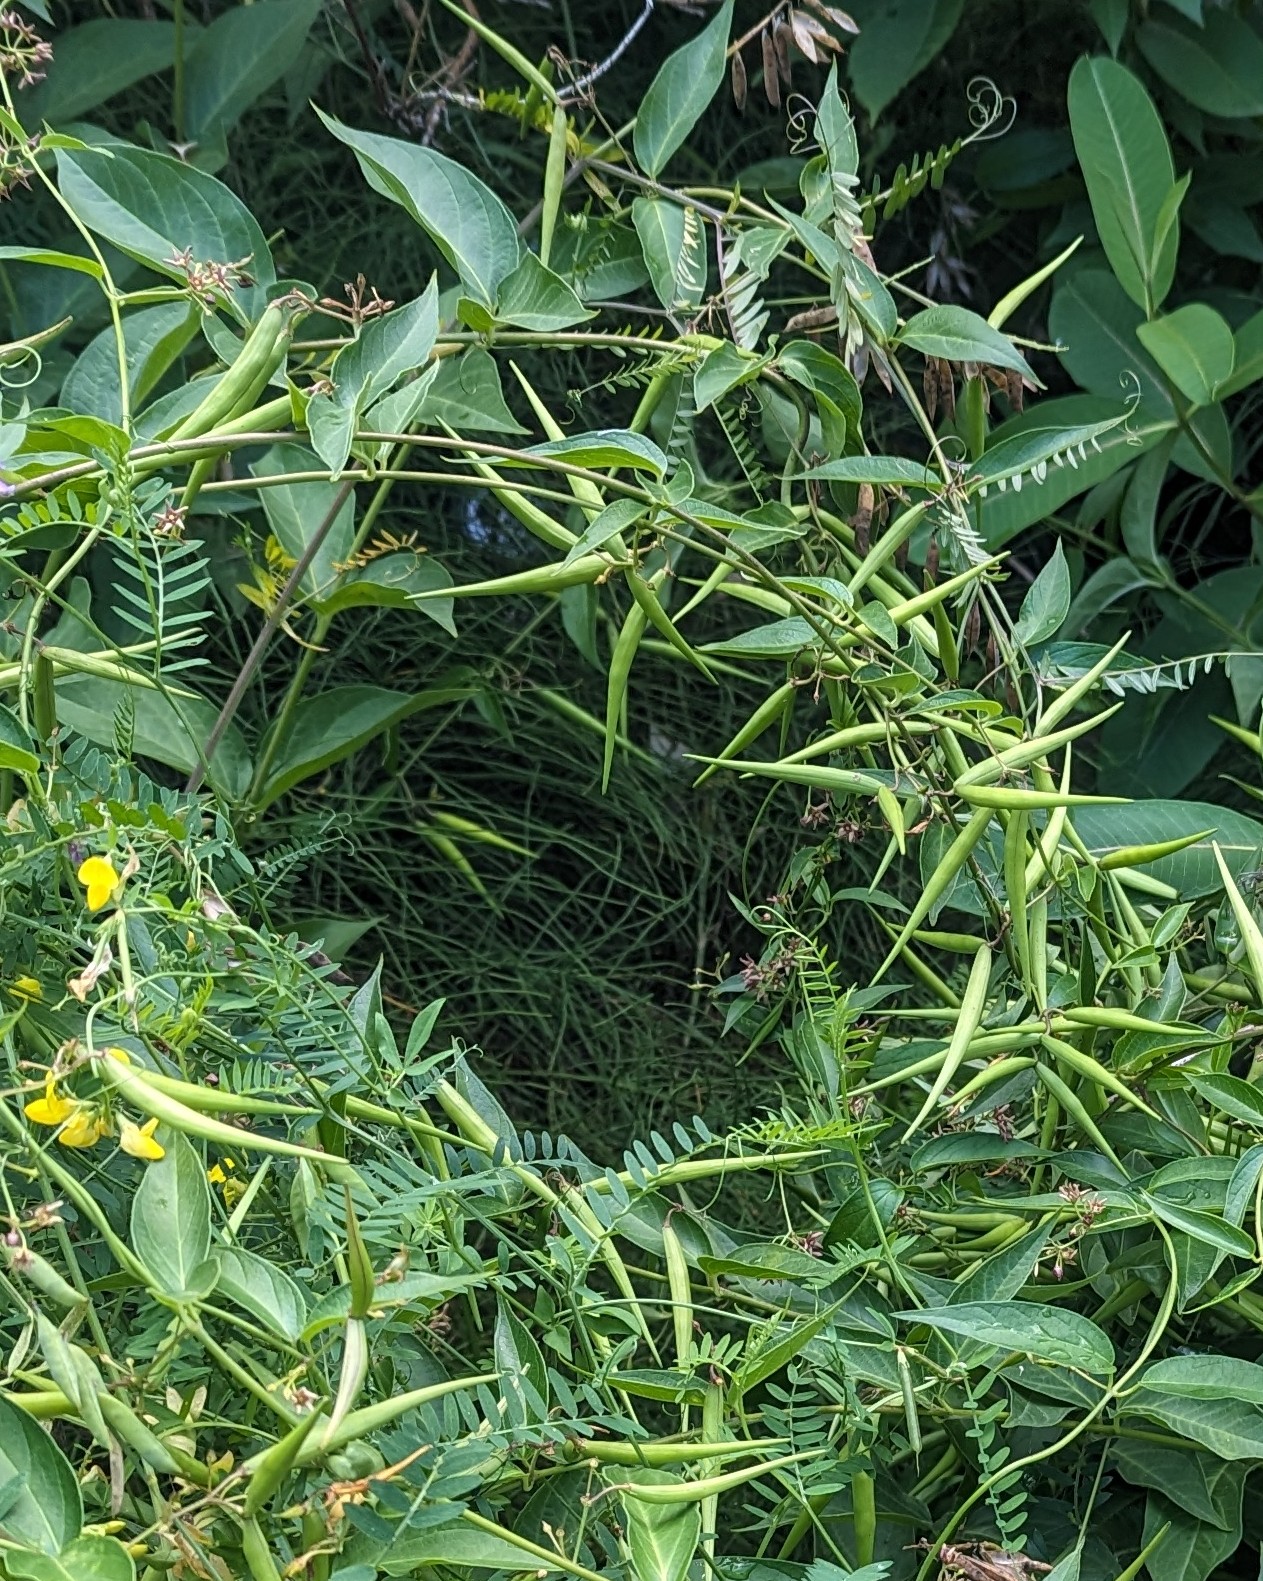 swallowworts grow in dense patches, smothering other plants, and produce multiple seed pods 